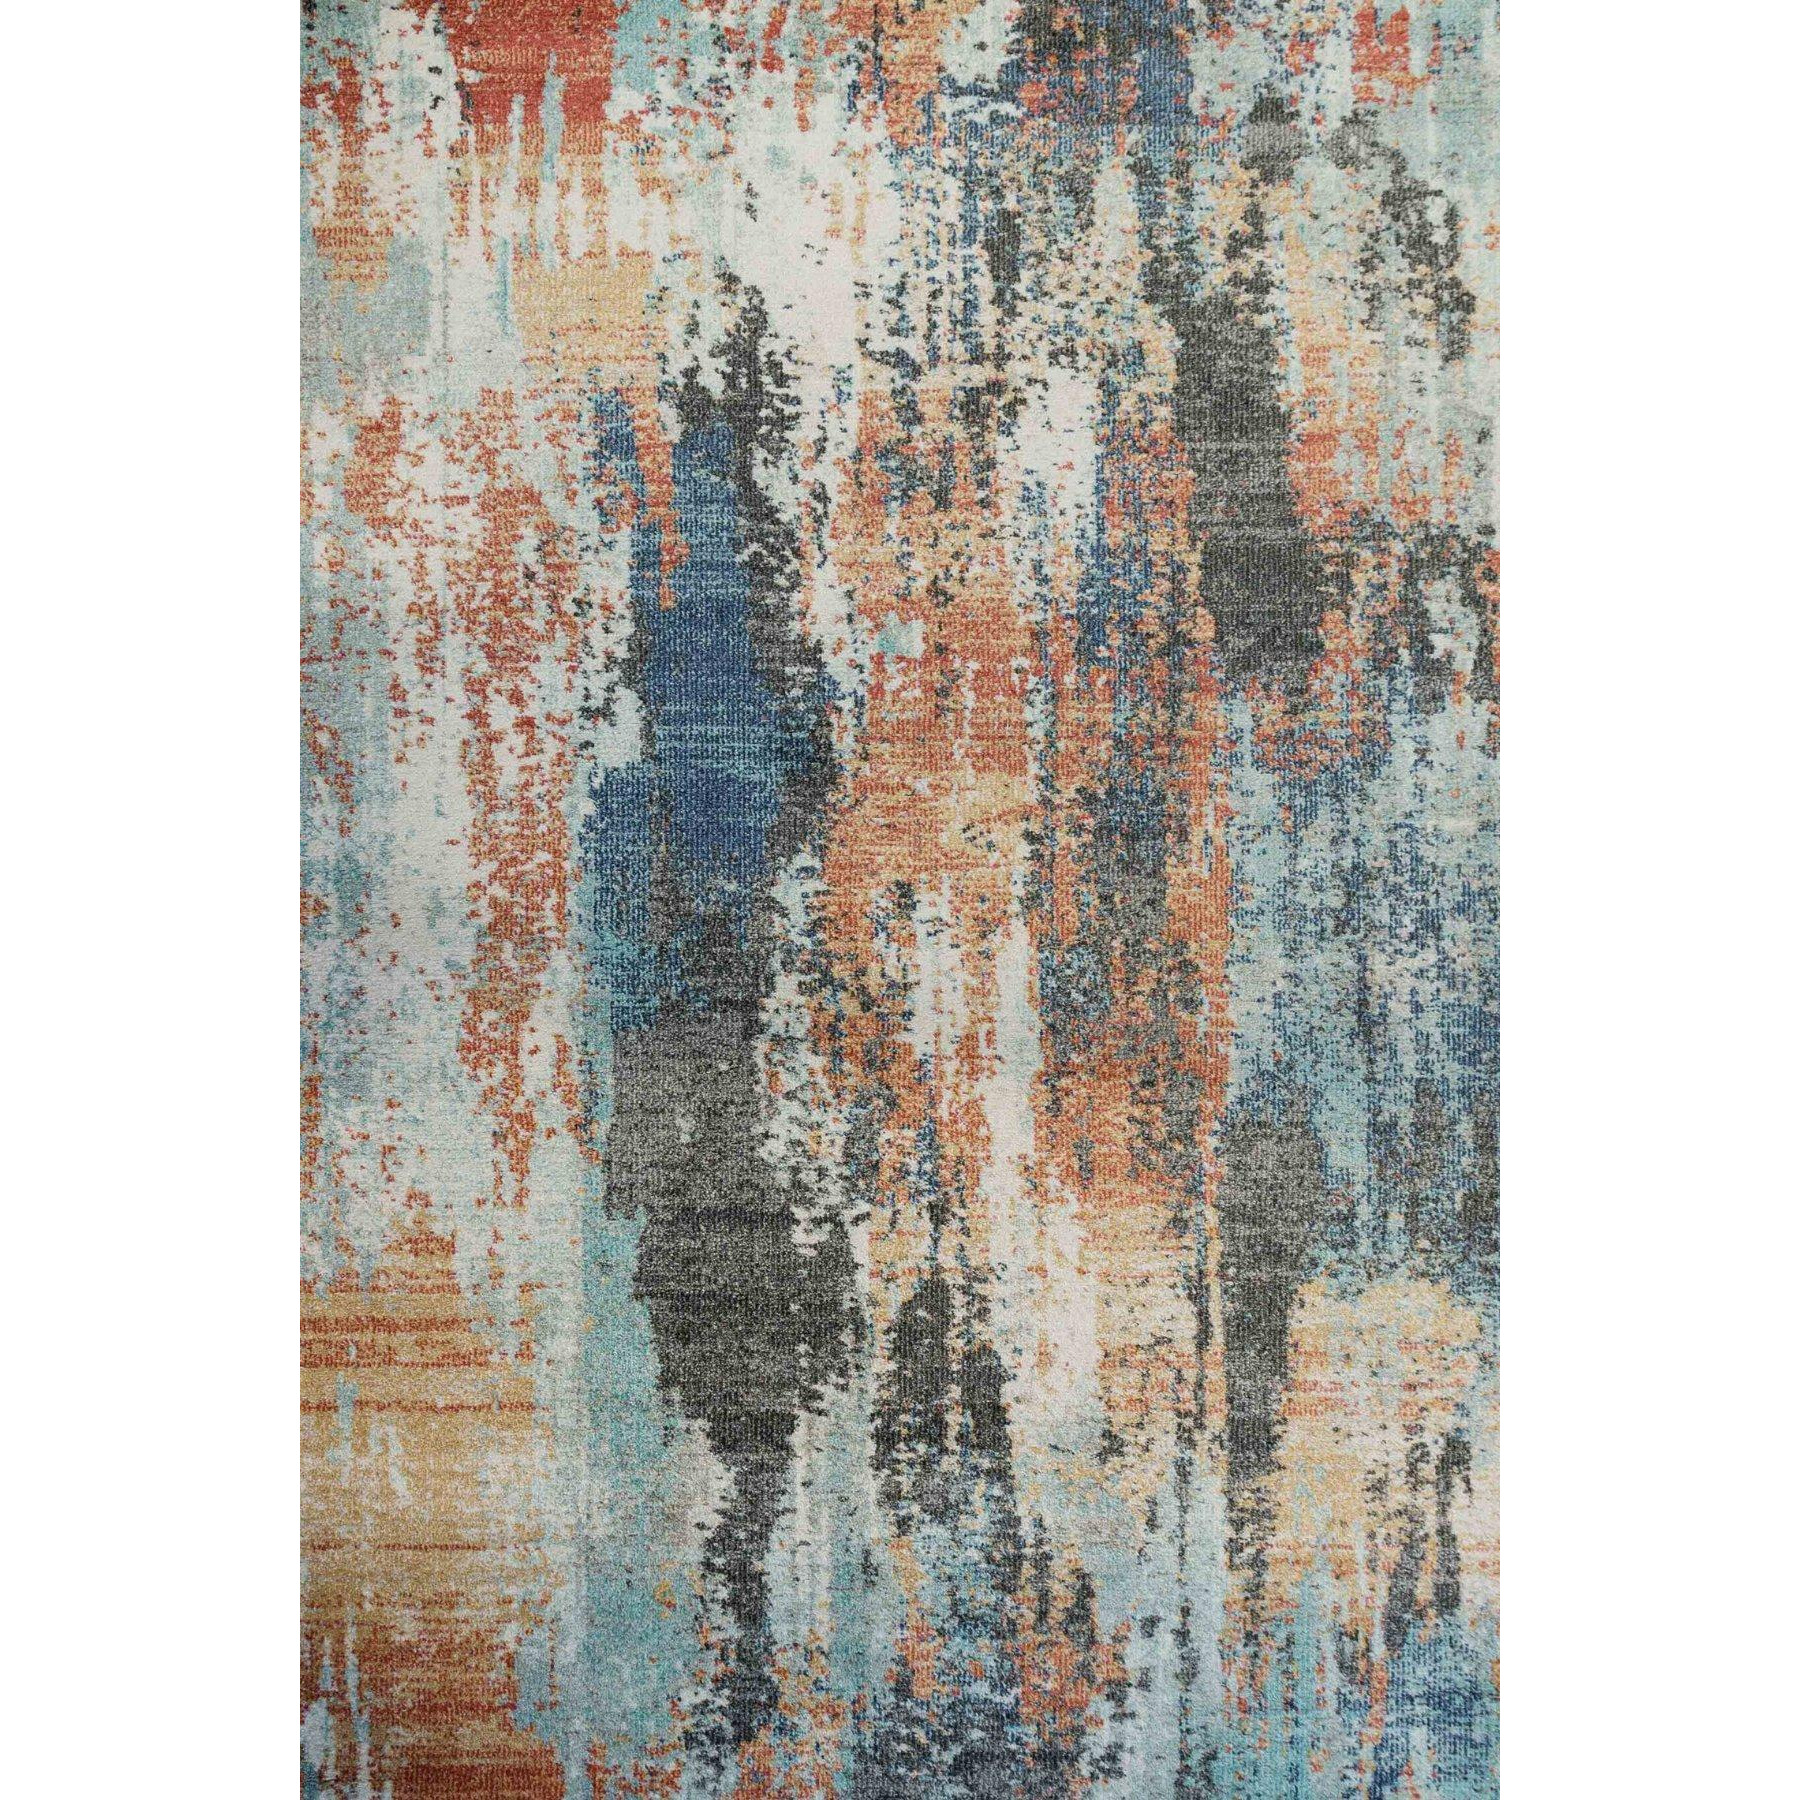 Multicoloured Soft Abstract Distressed Fireside Area Rug - image 1